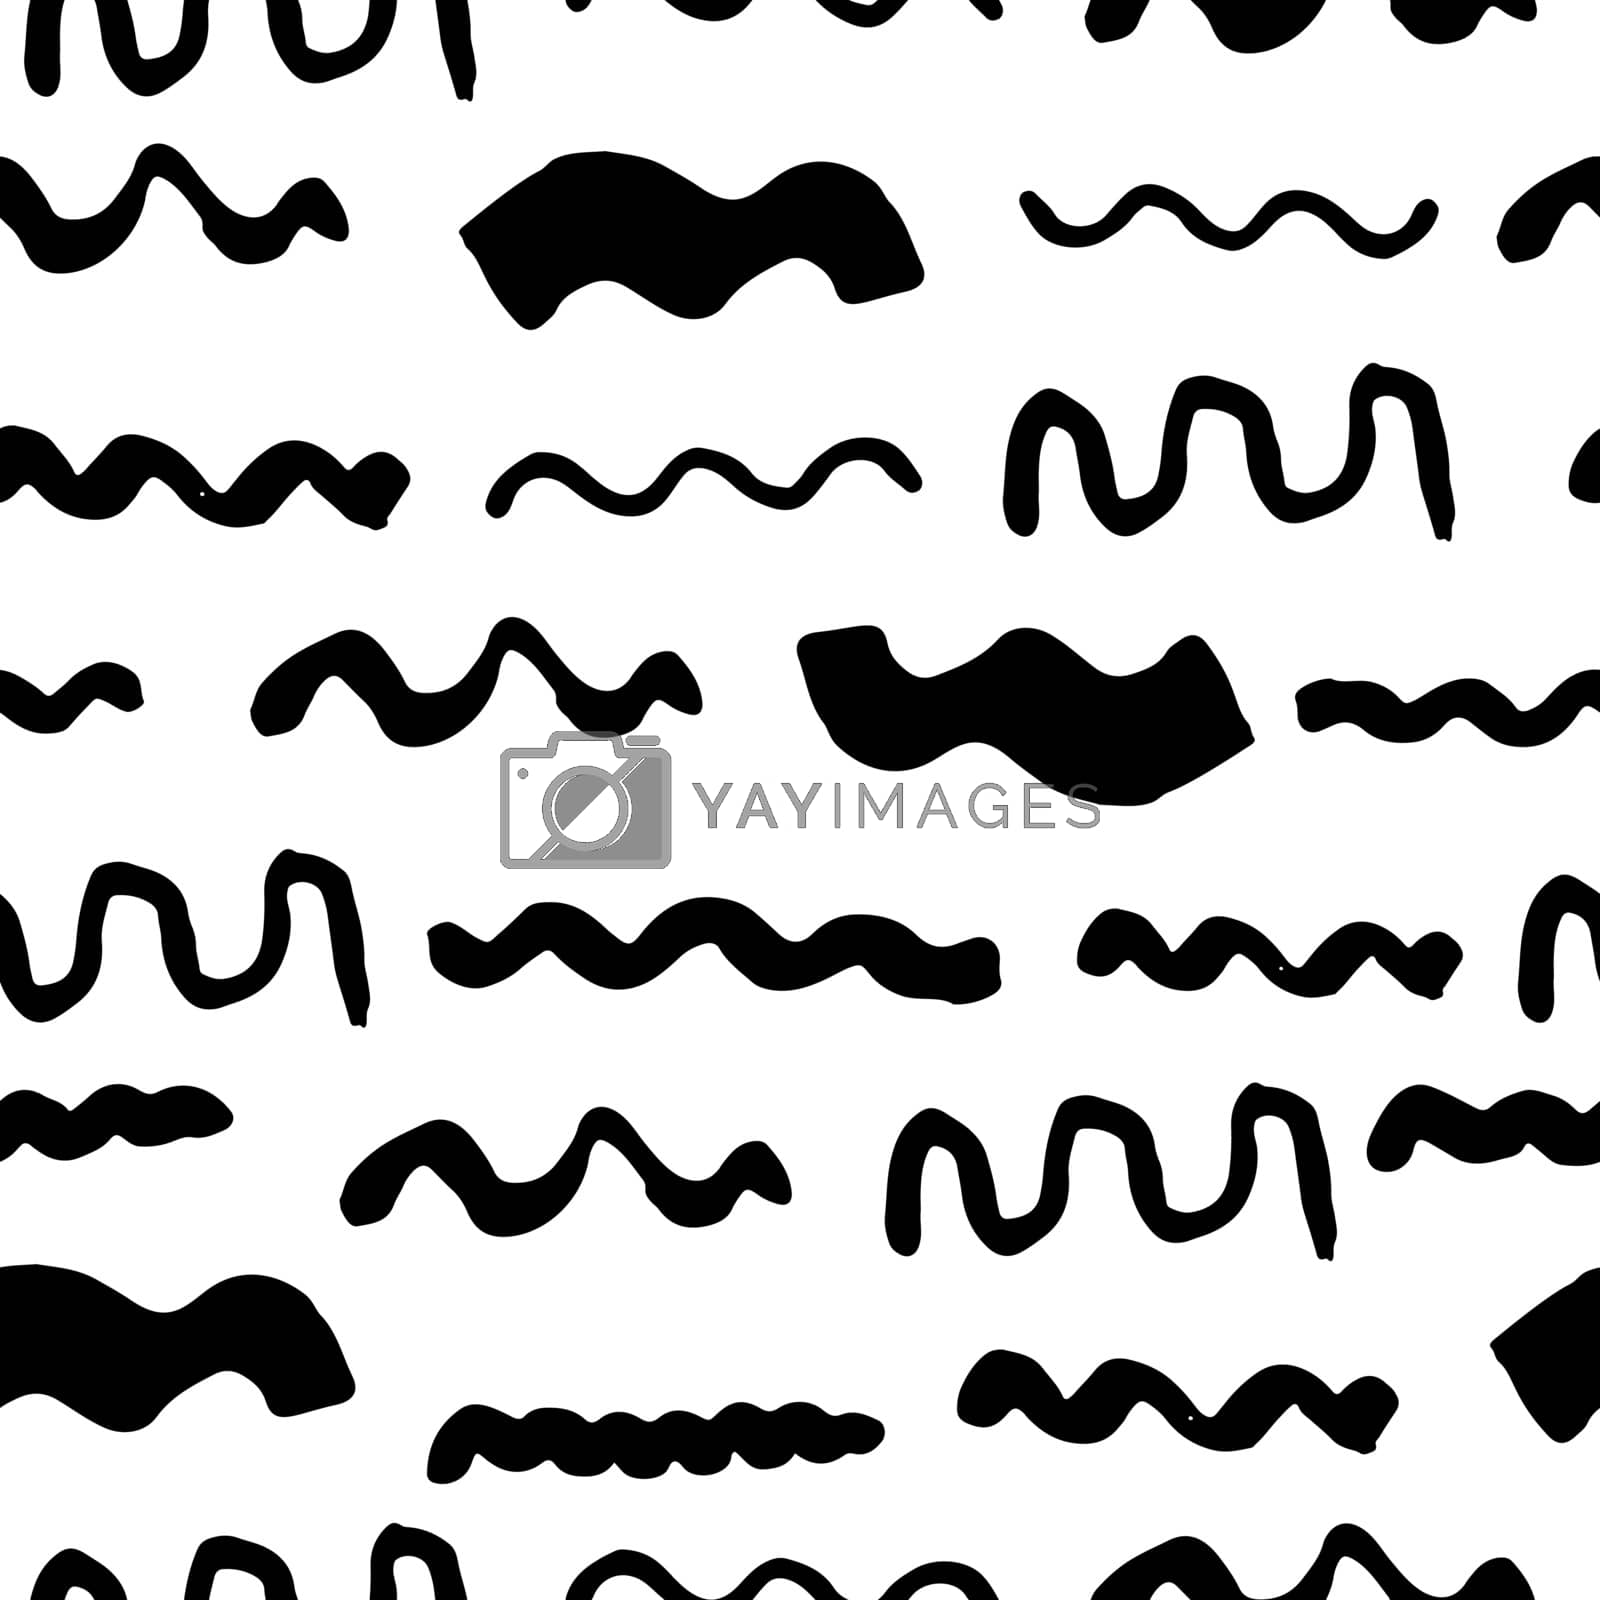 Royalty free image of Simple stylish seamless hand-made pattern by Vanzyst